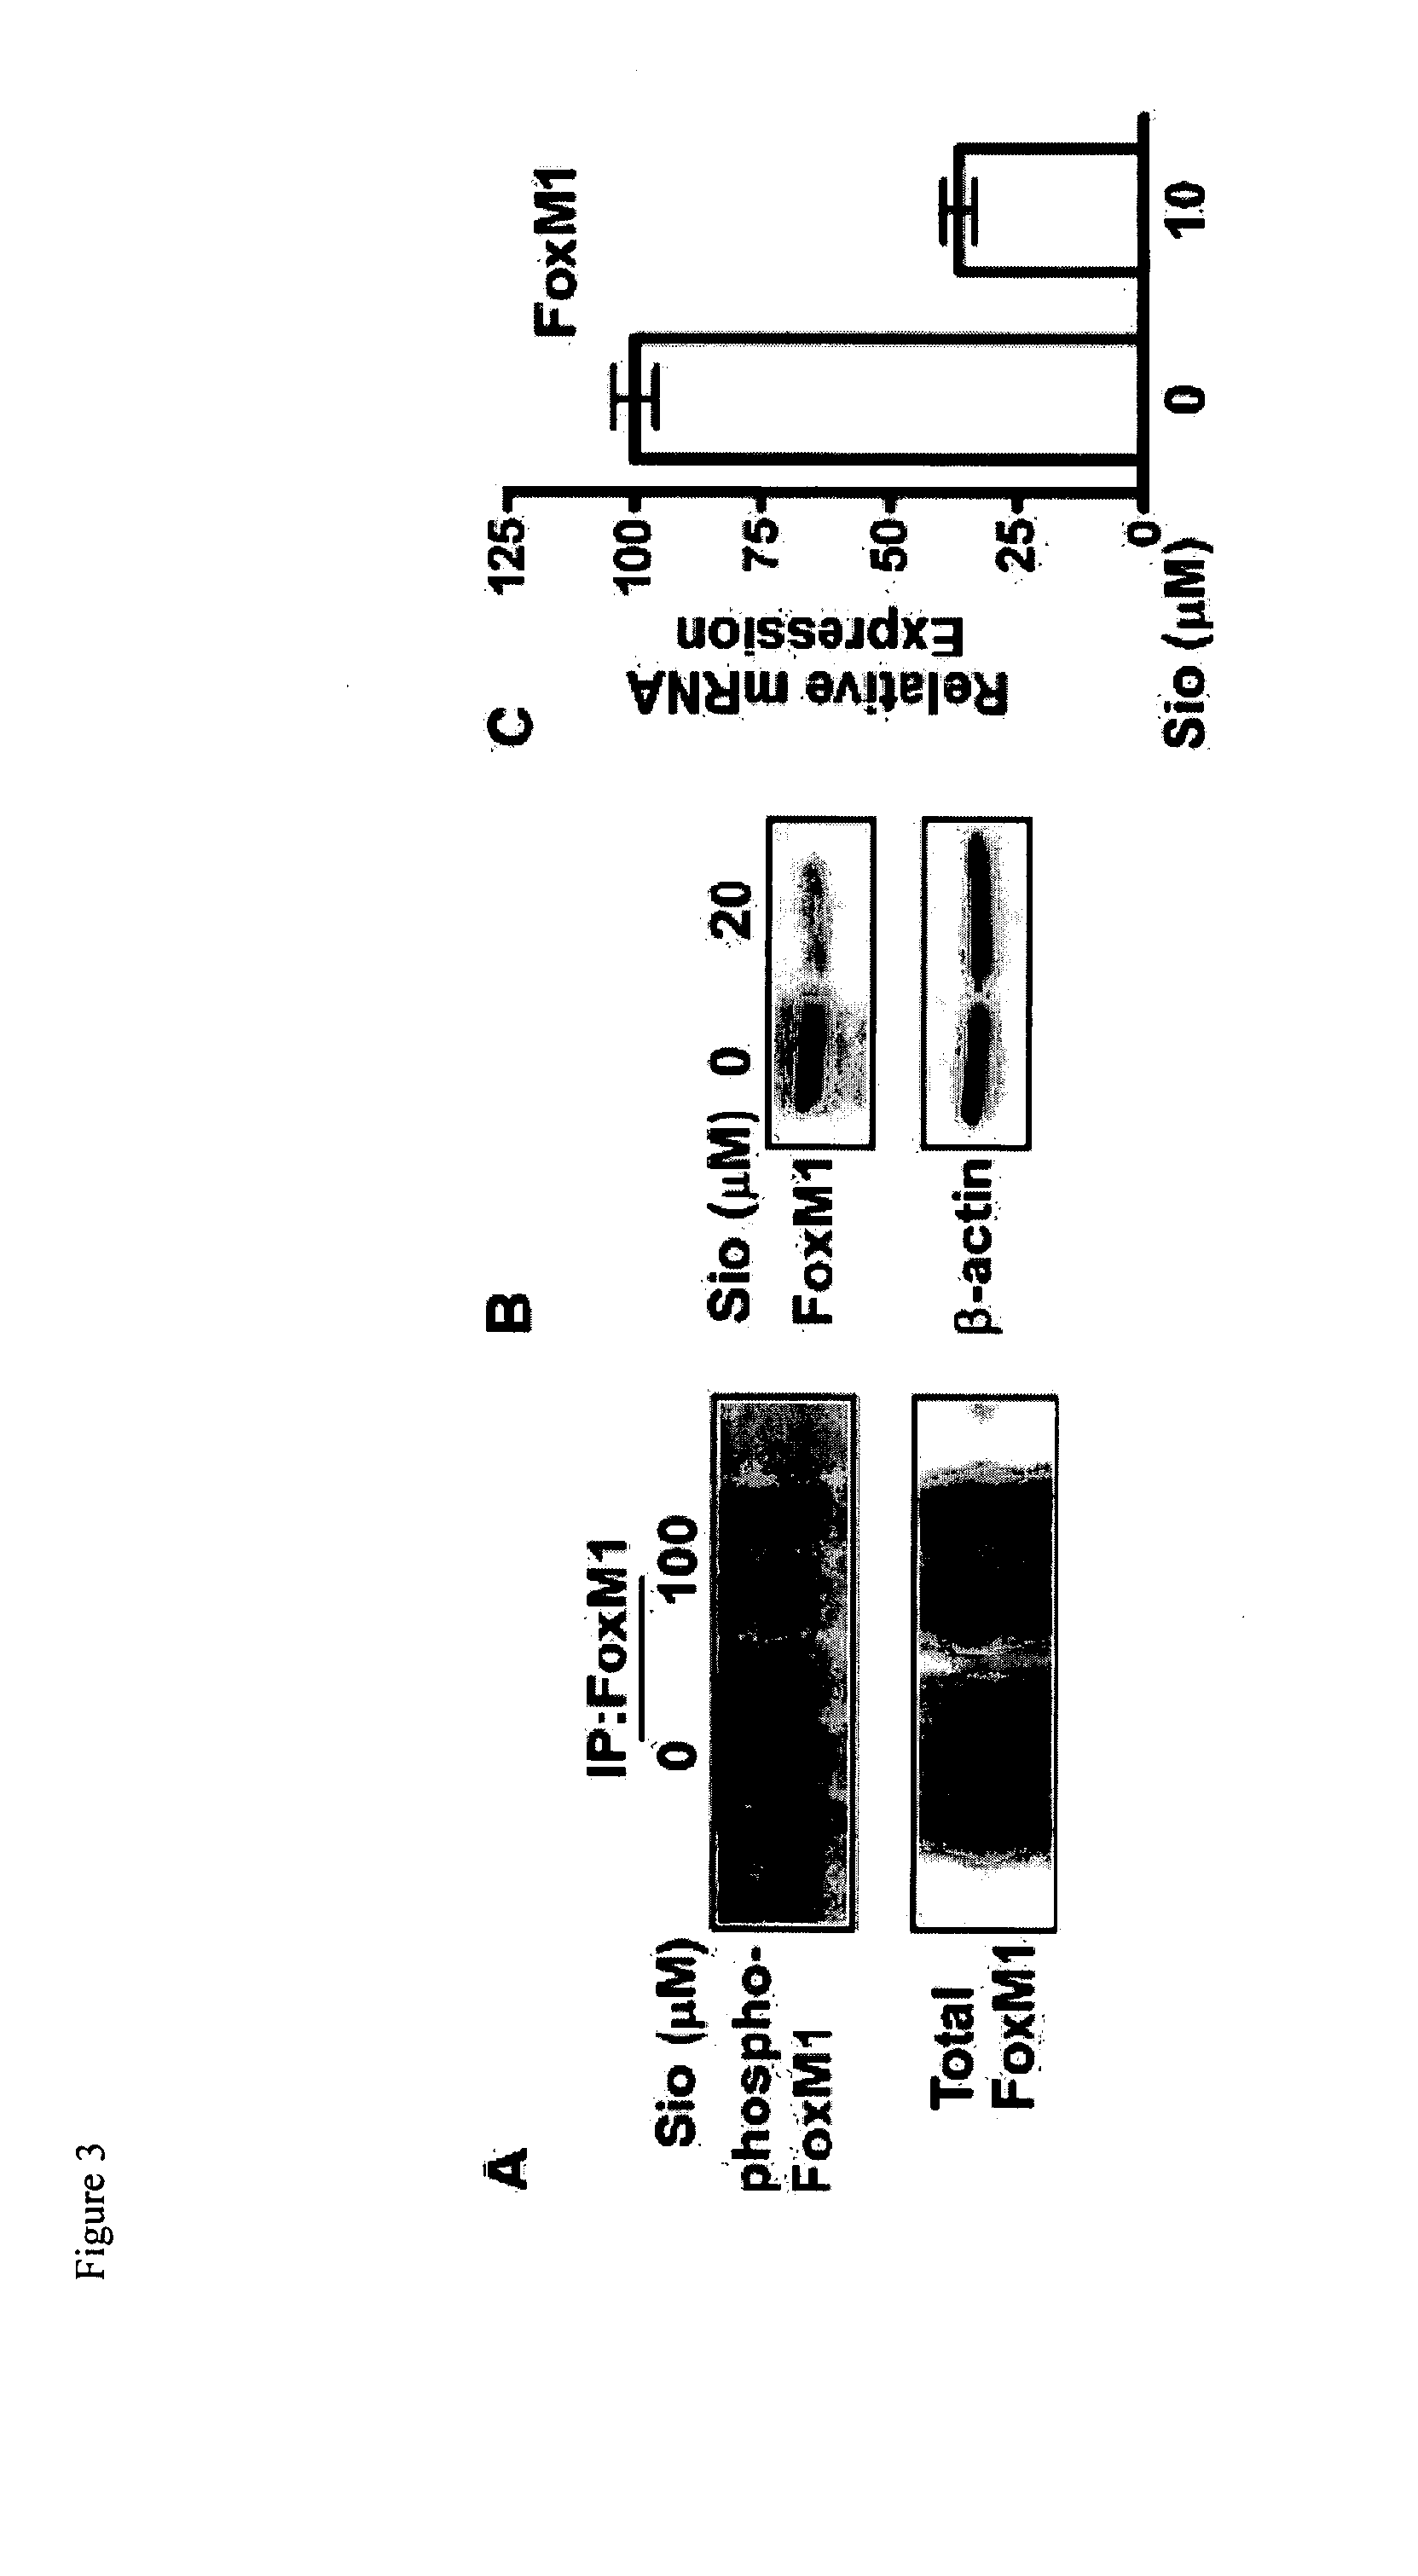 Identification and use of agents that modulate oncogenic transcription agent activity